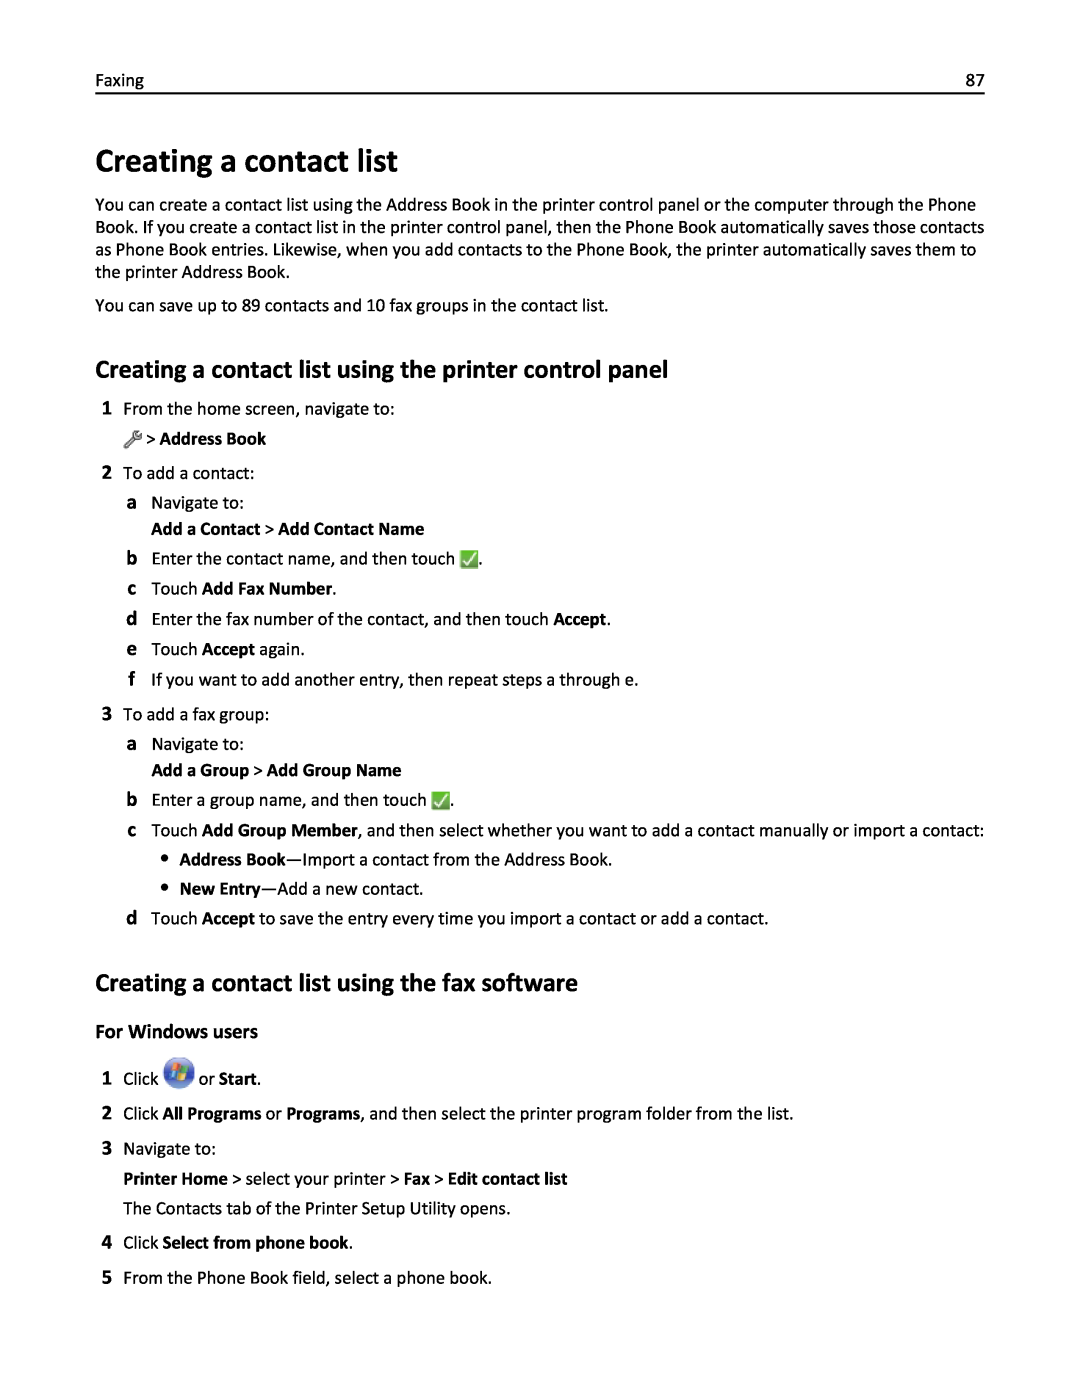 Lexmark 200, 20E manual Creating a contact list using the fax software, Add a Contact Add Contact Name 